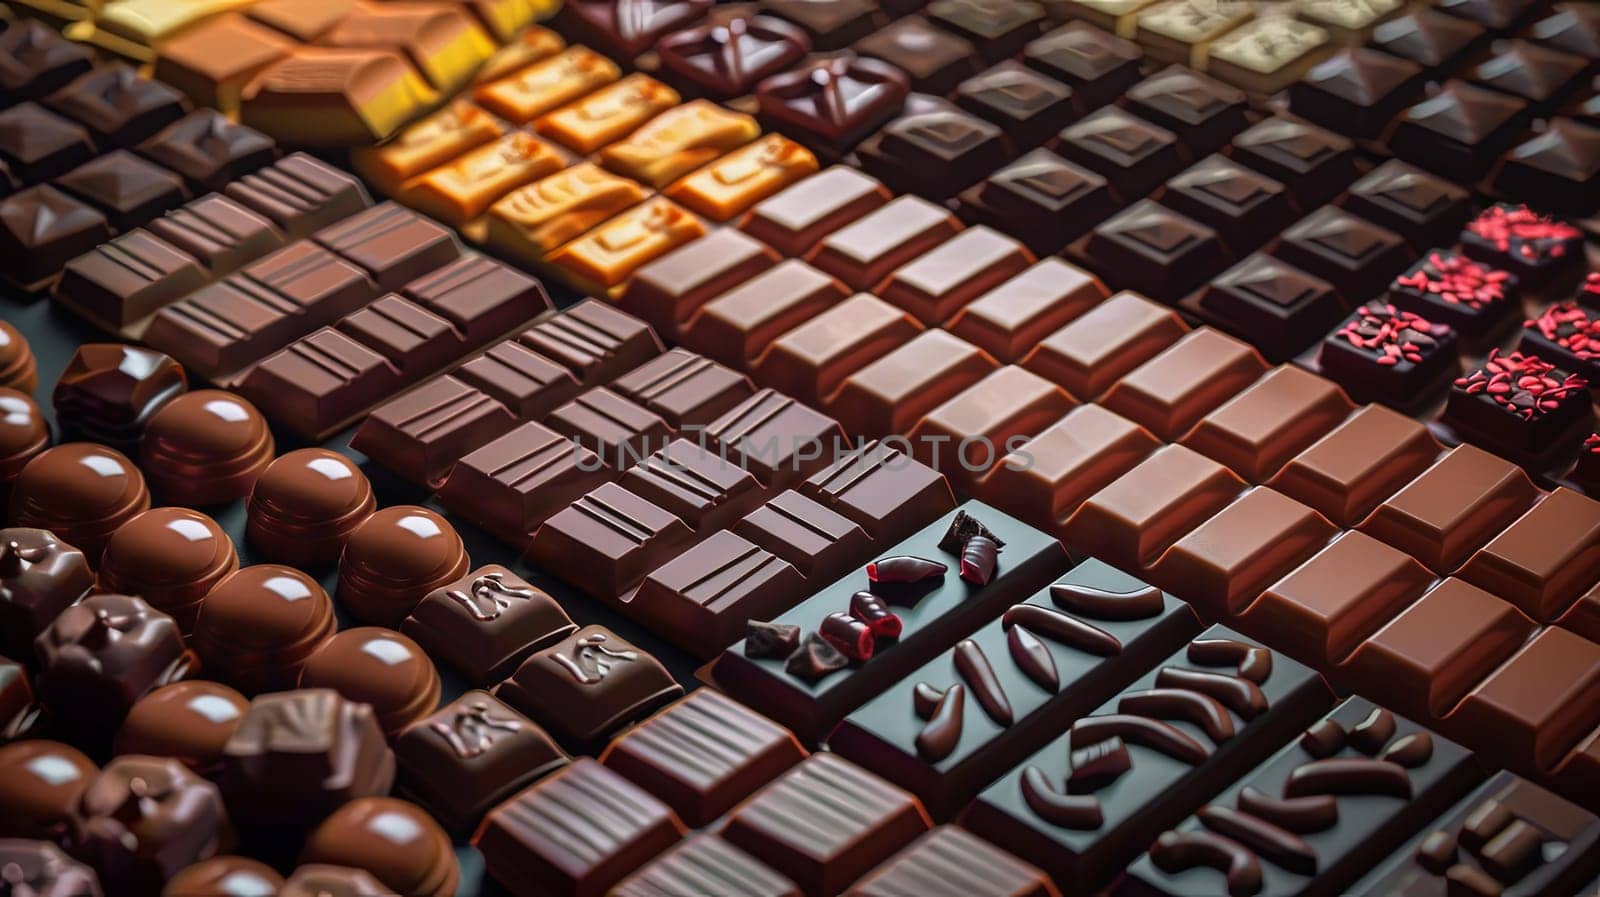 Various chocolate bars of different flavors and types neatly arranged on a table.